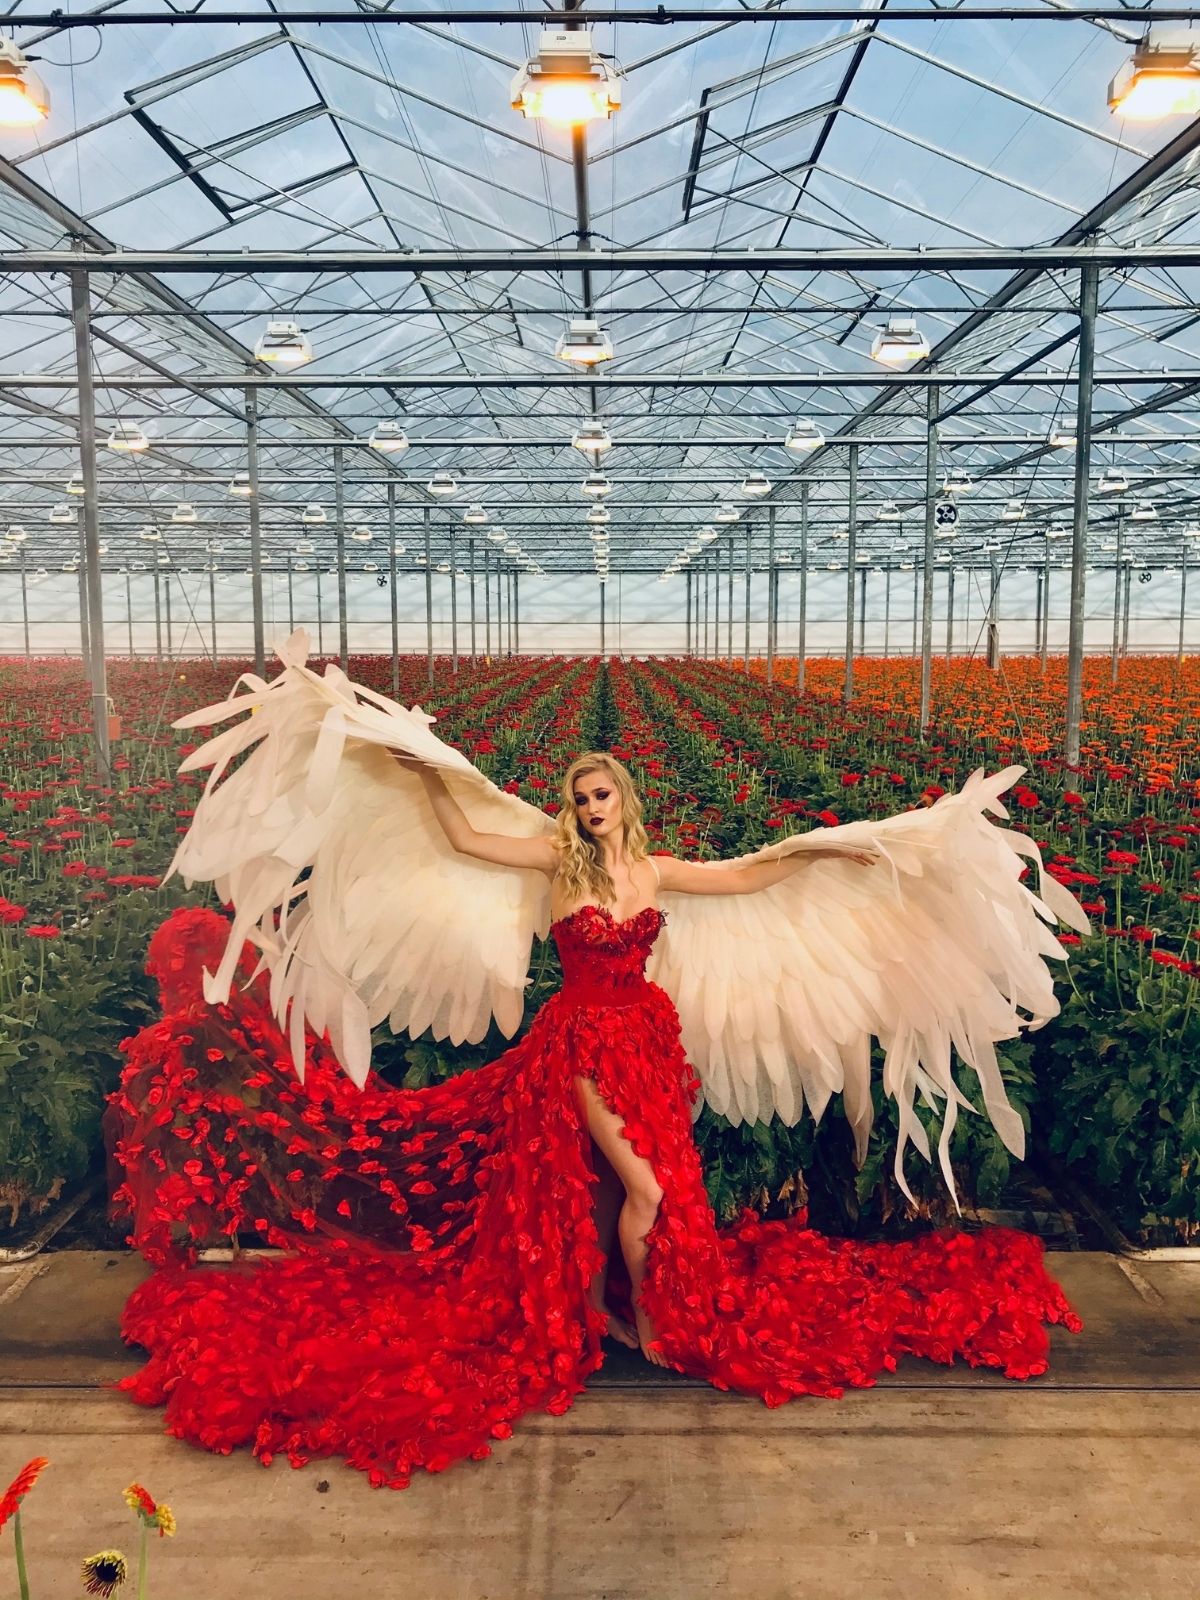 These Photoshoots Give an Everlasting Life to Otherwise Wasted Flowers - red dress with wings - art photo projects on thursd